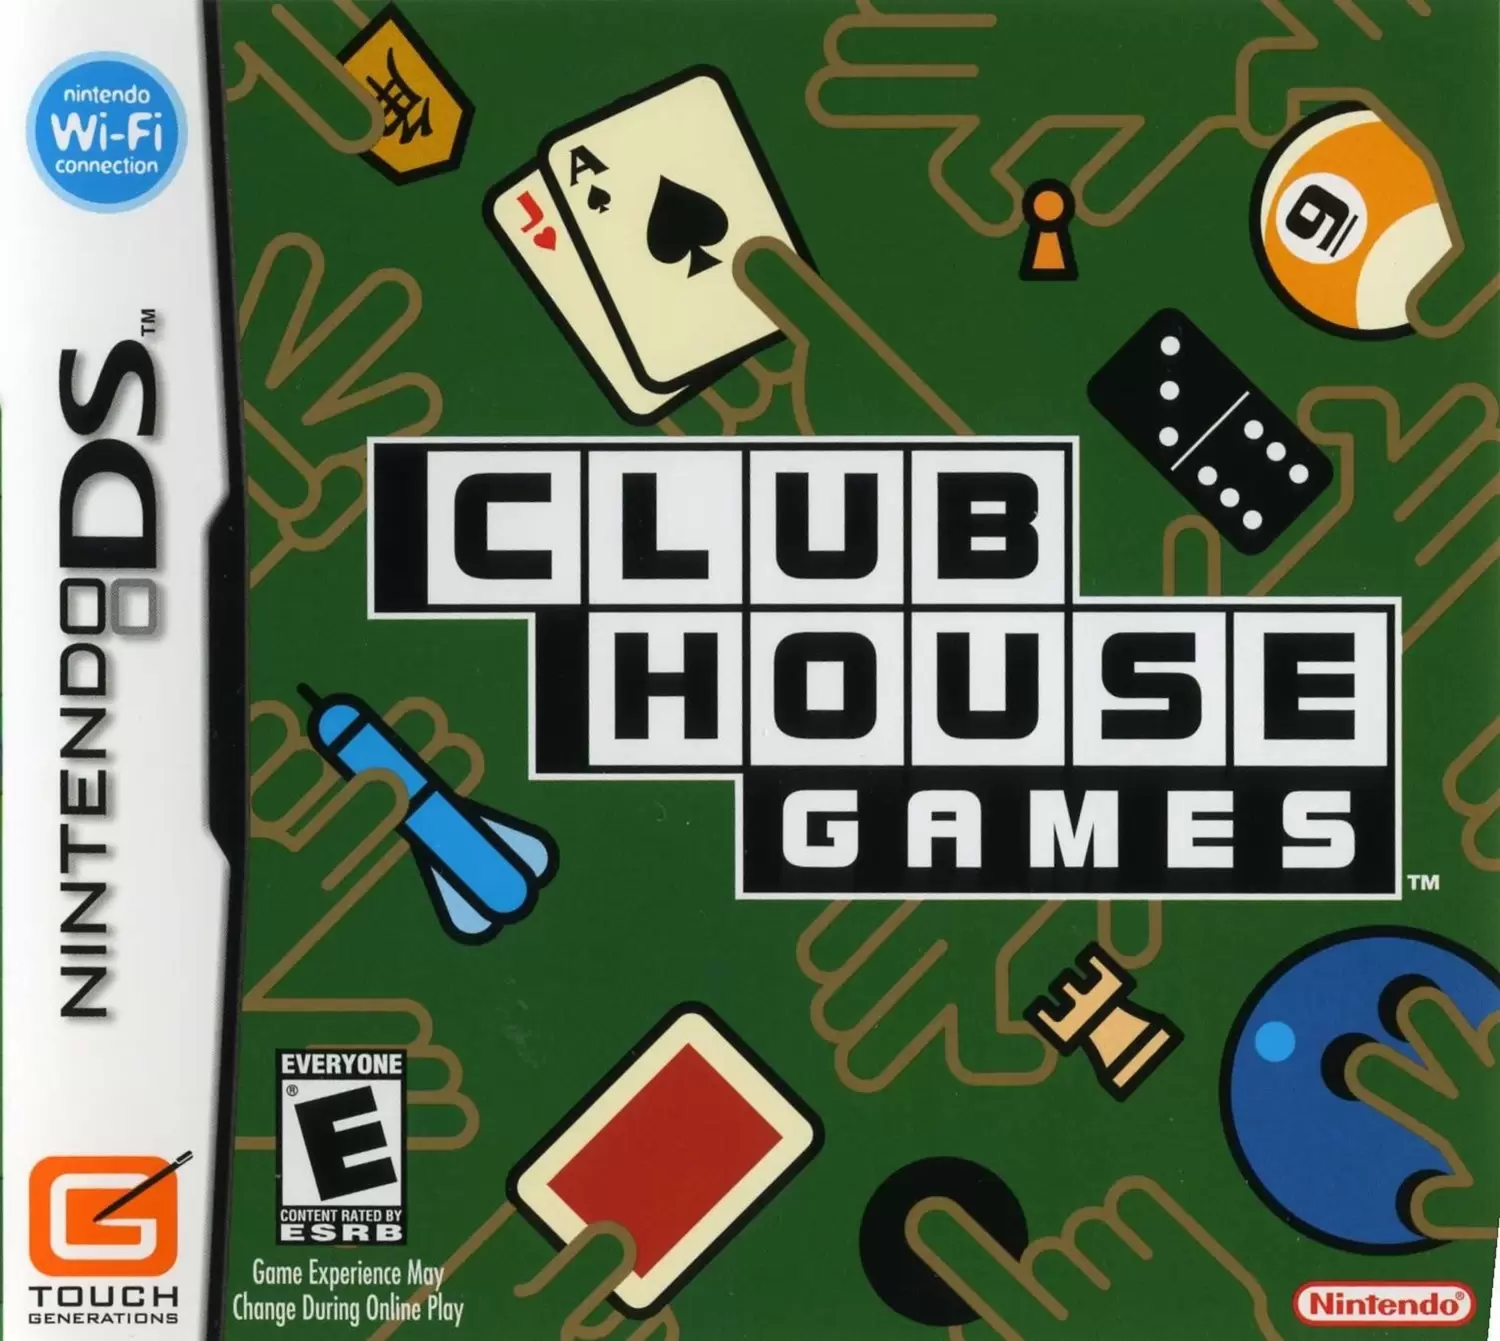 Nintendo DS Games - Clubhouse Games